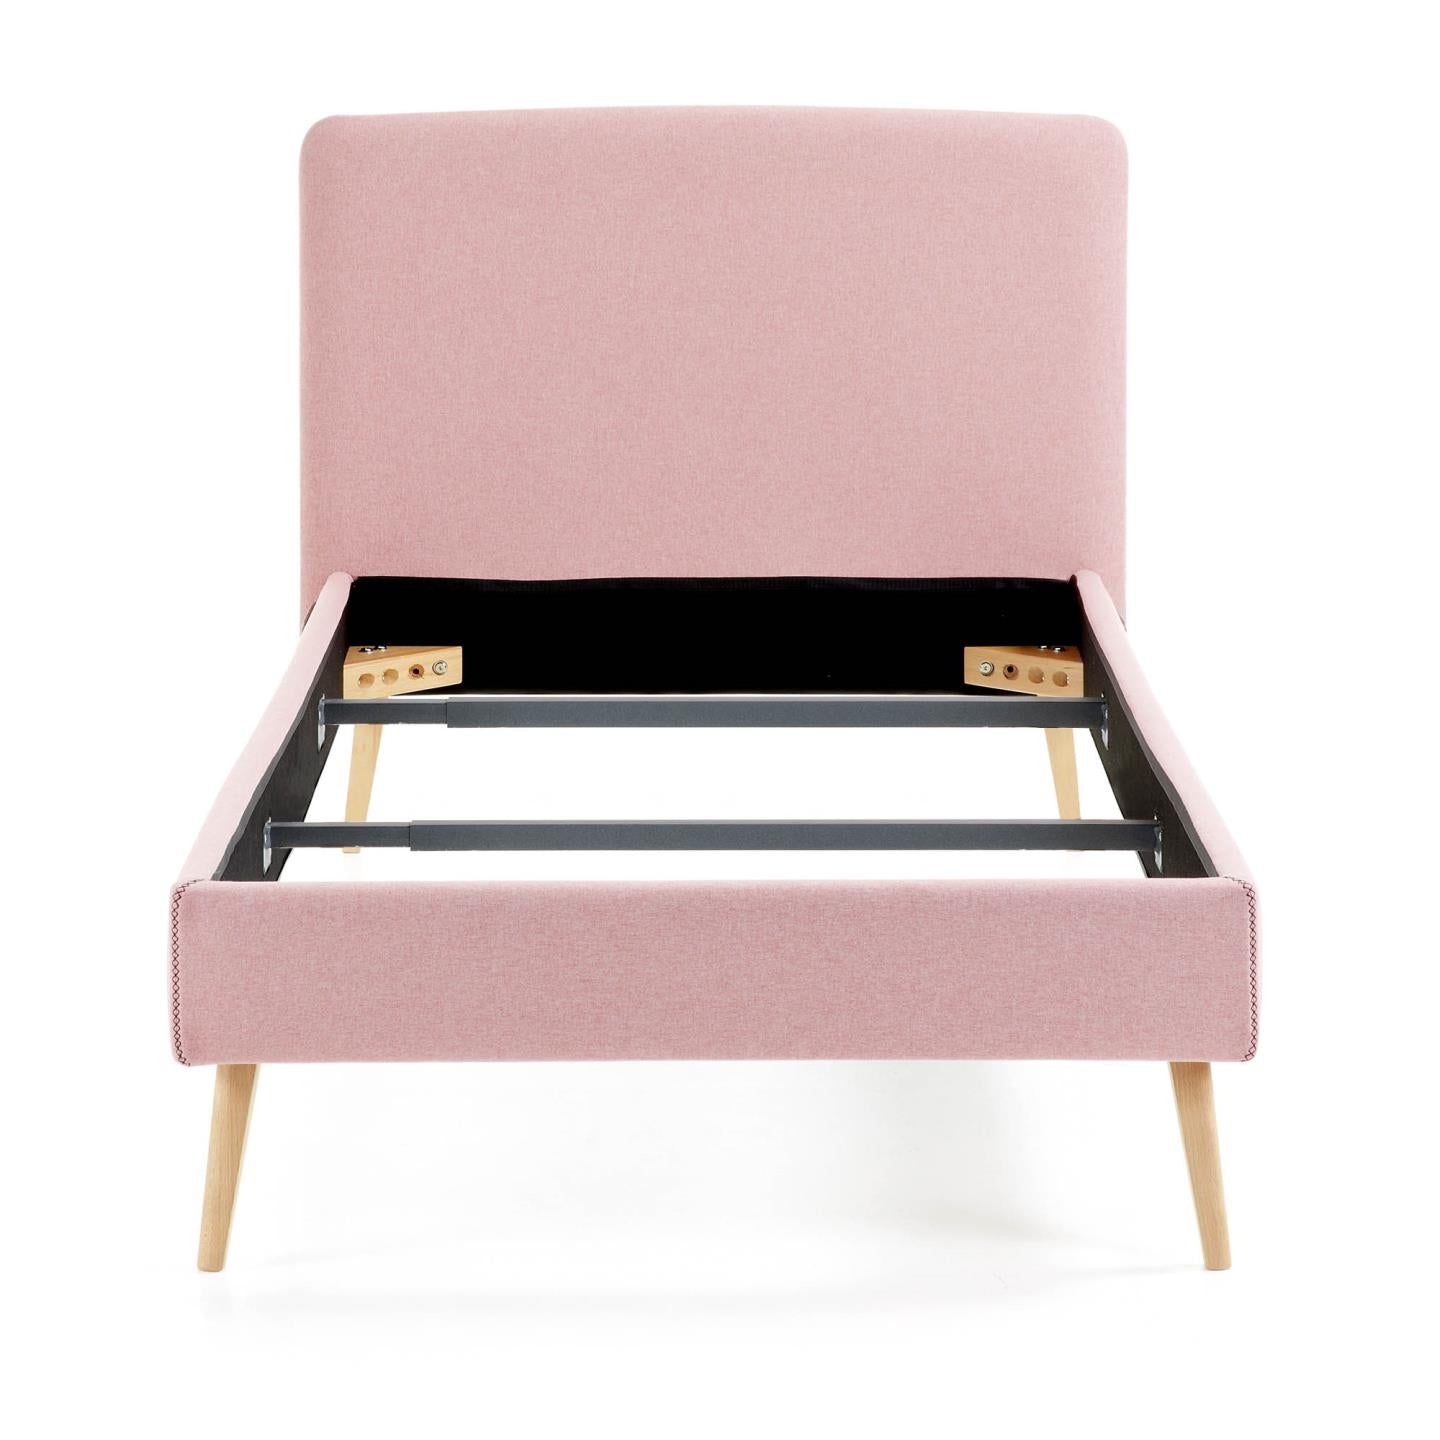 Dyla bed with removable cover in pink, with solid beech wood legs for a 90 x 190 cm mattress